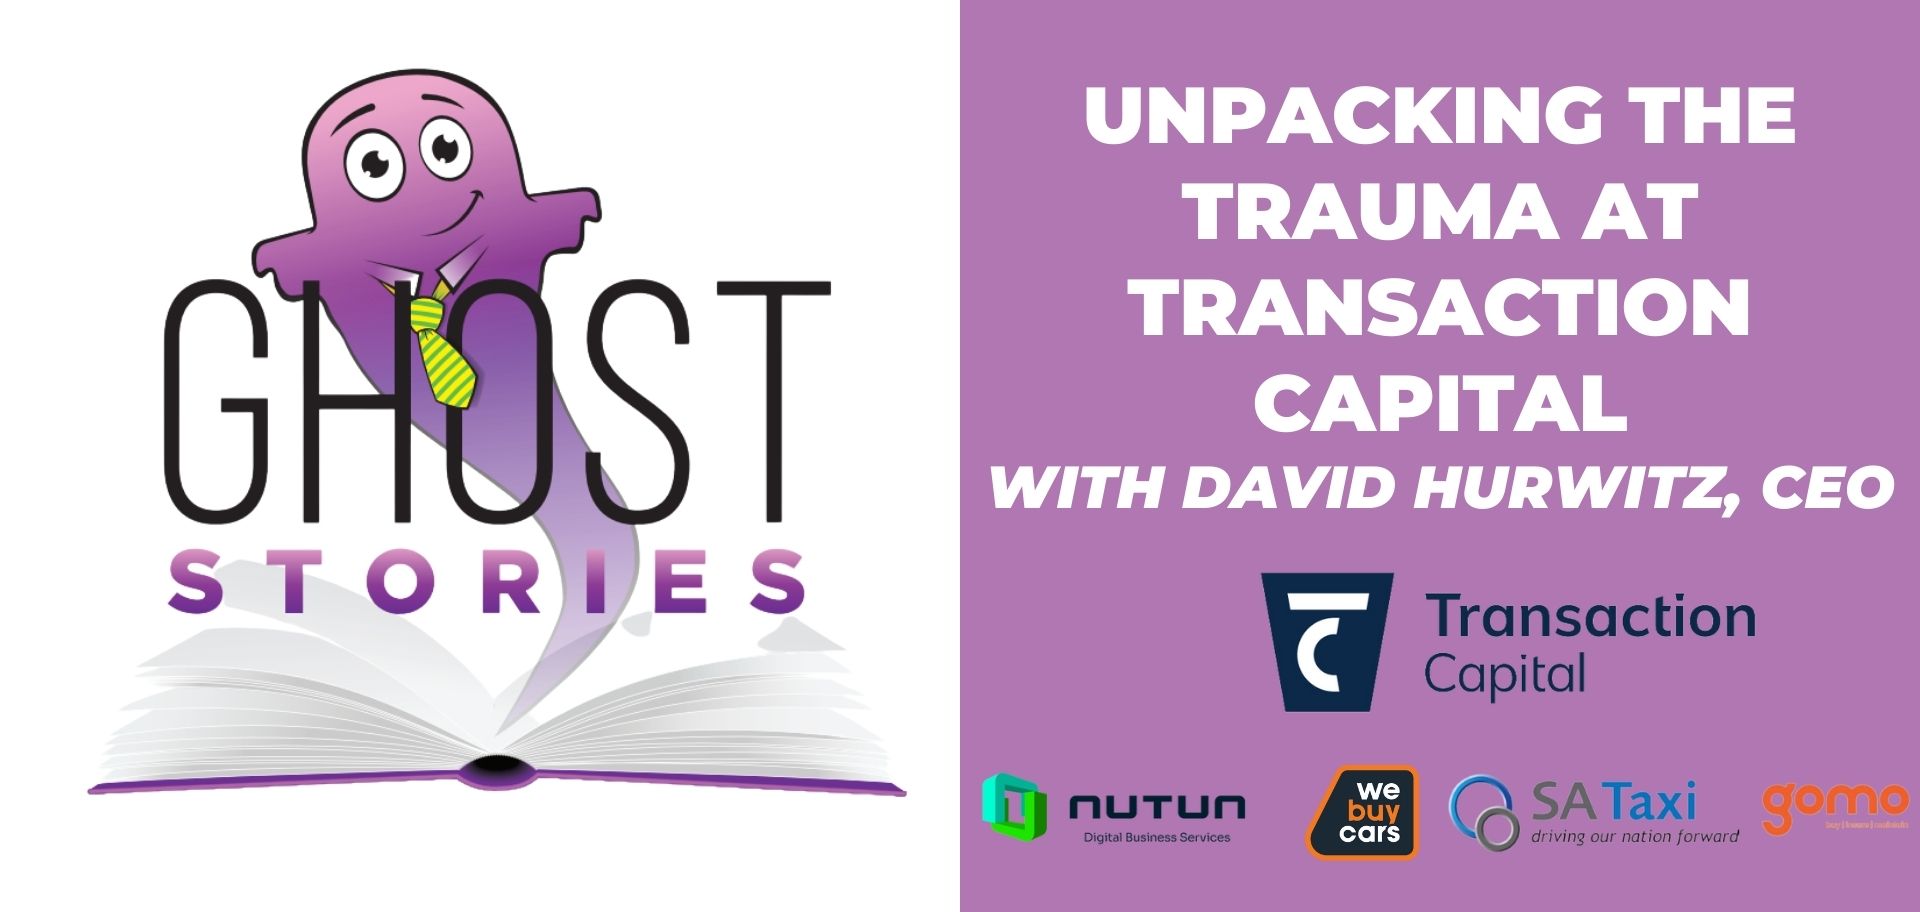 Ghost Stories #10: Unpacking the Trauma at Transaction Capital (with David Hurwitz, CEO)